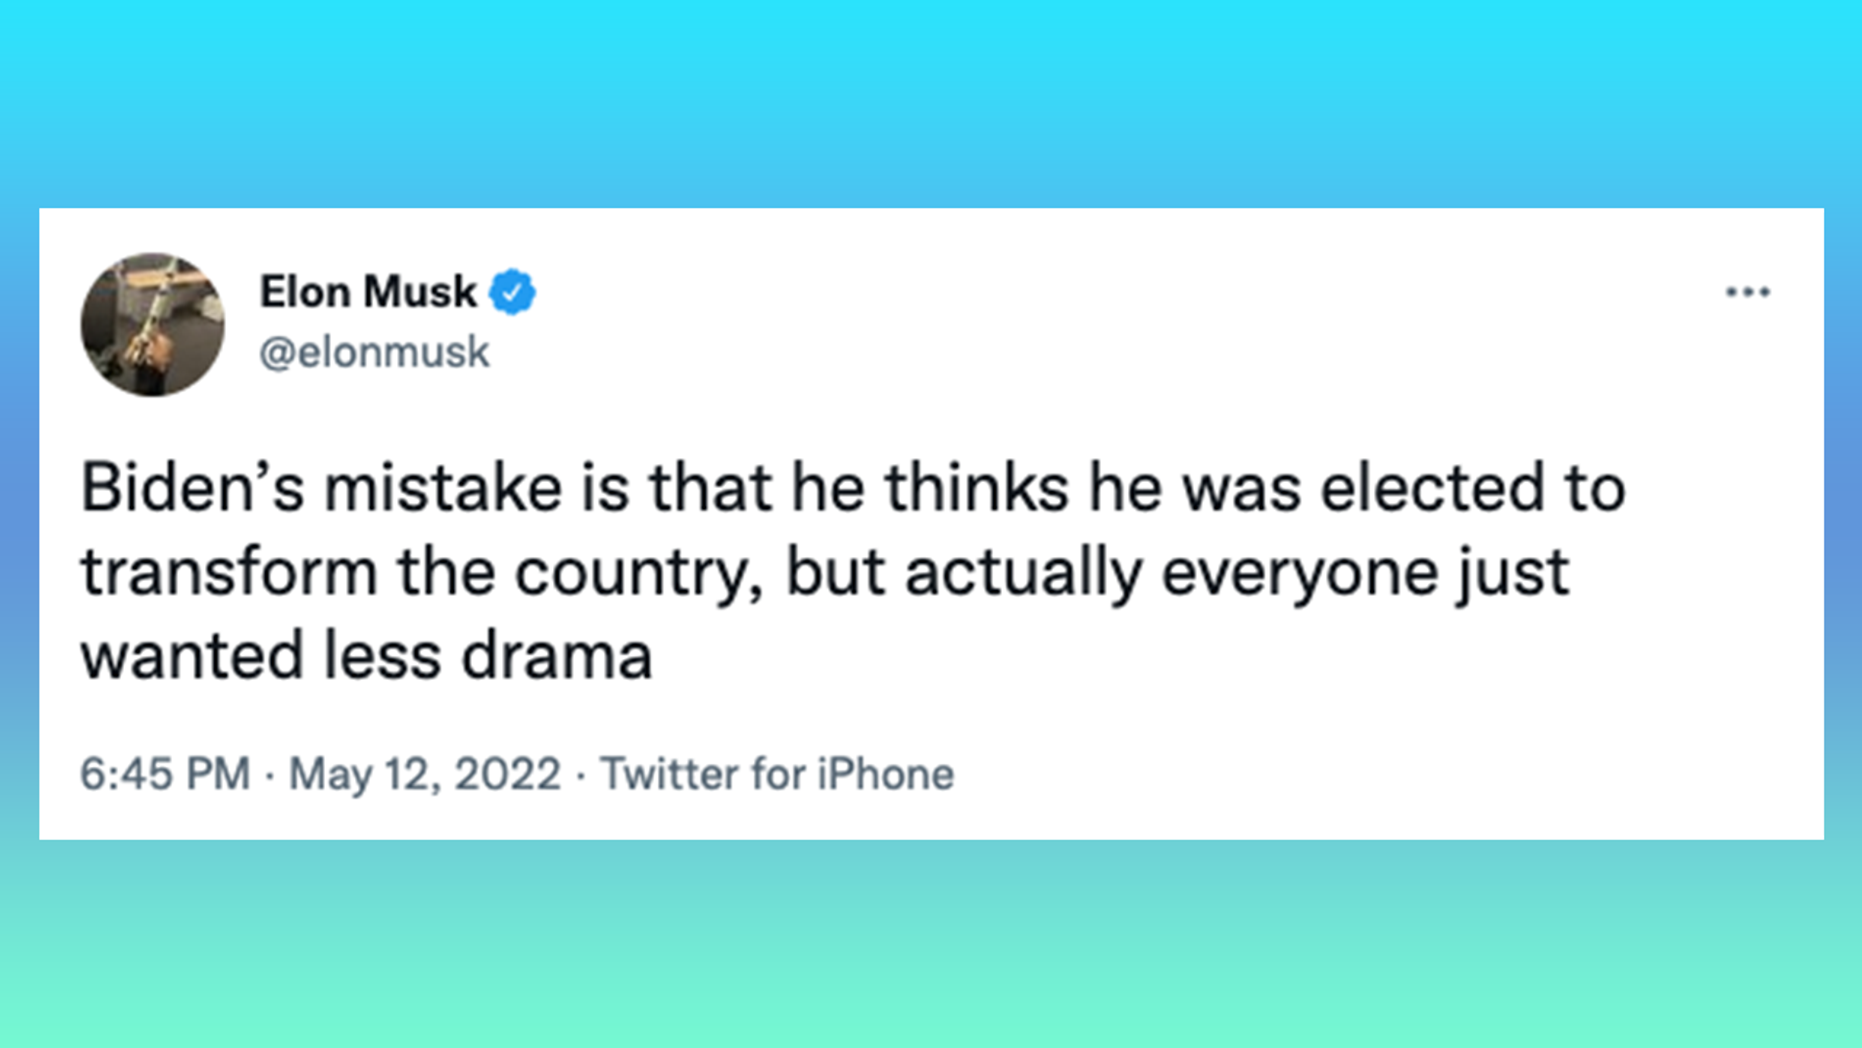 Elon Musk triggers liberals with tweet on ‘Biden’s mistake’: ‘Proof being rich doesn’t make you smart’